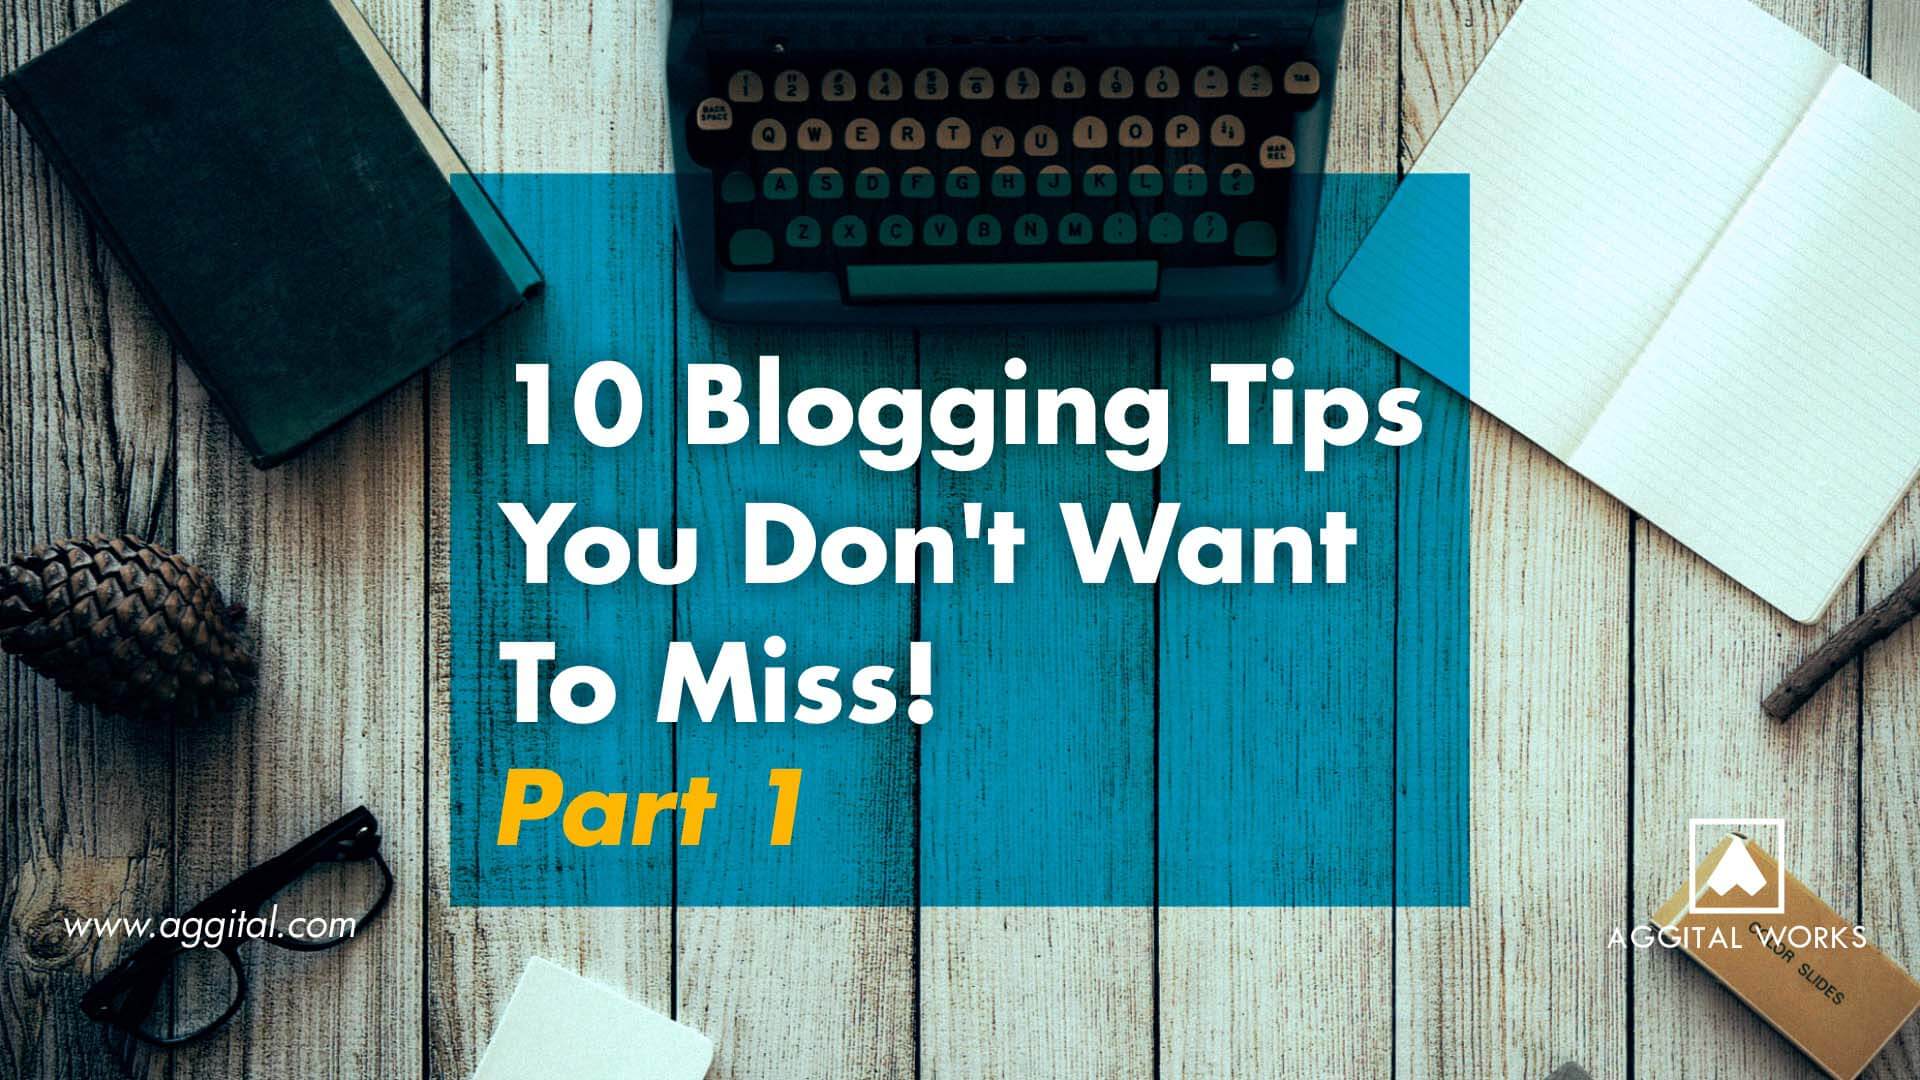 Here Are 10 Blogging Tips You Don't Want To Miss!